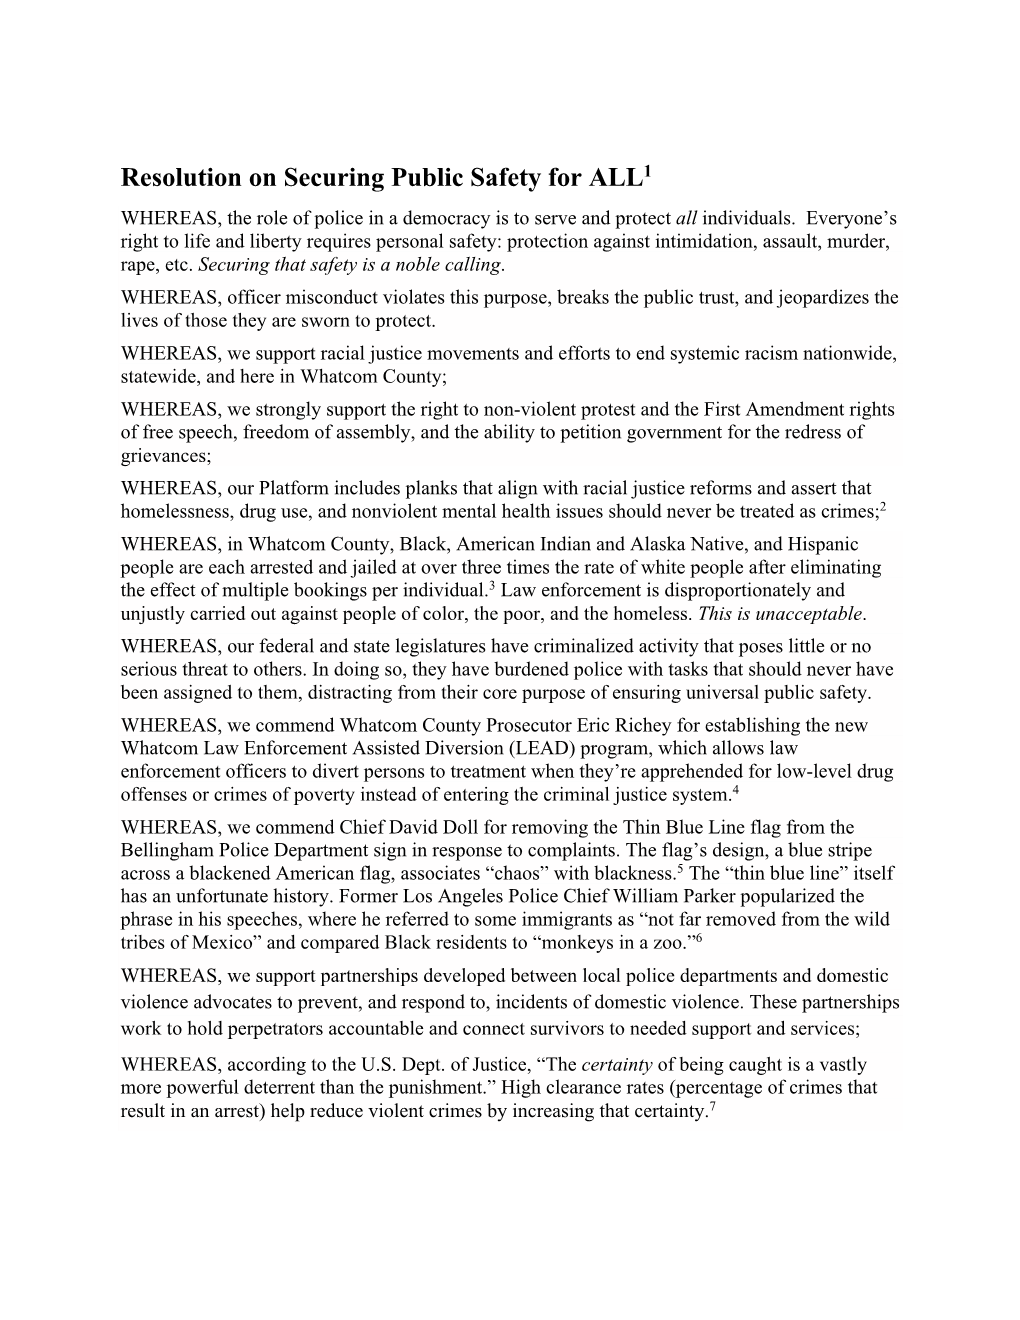 2020-11-28 Resolution on Securing Public Safety For